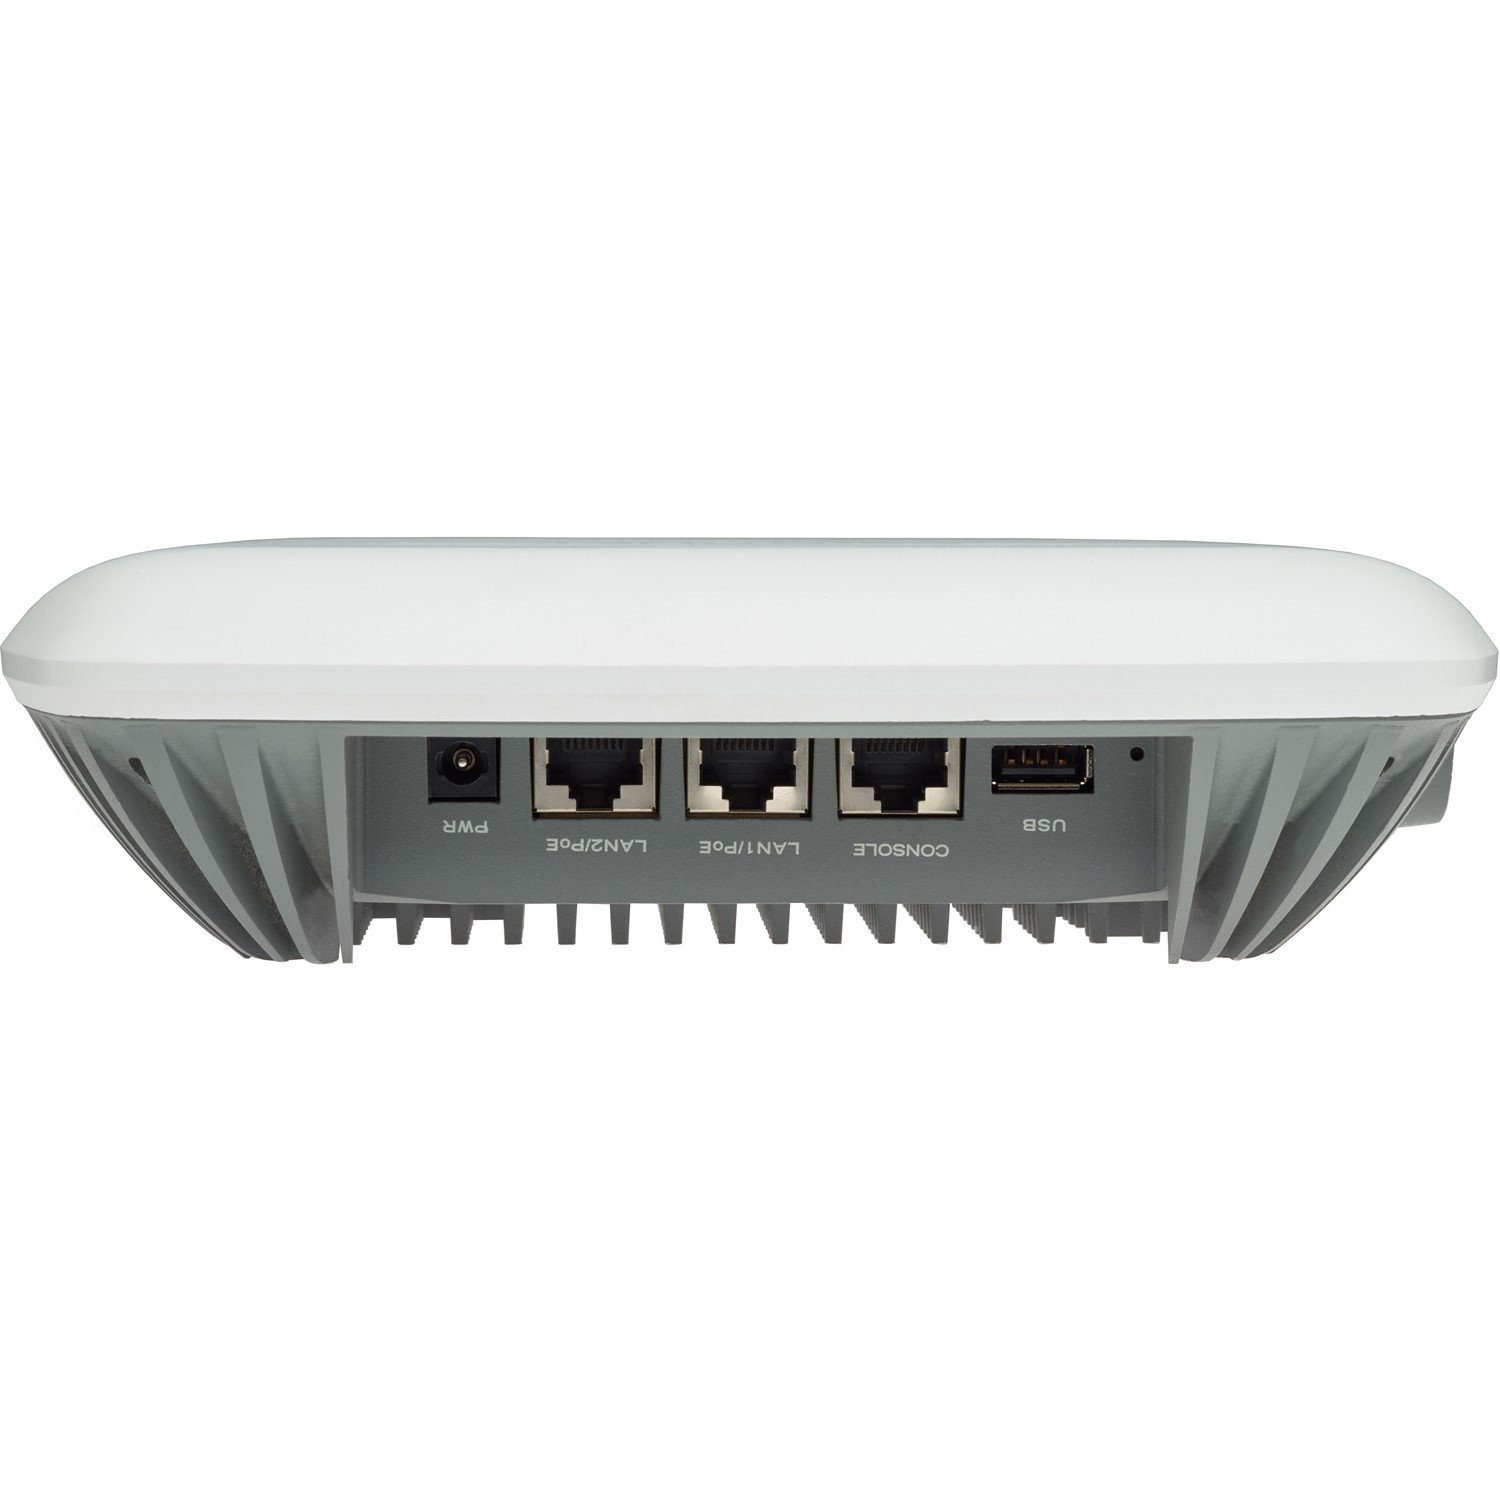 fortinet wlan access point